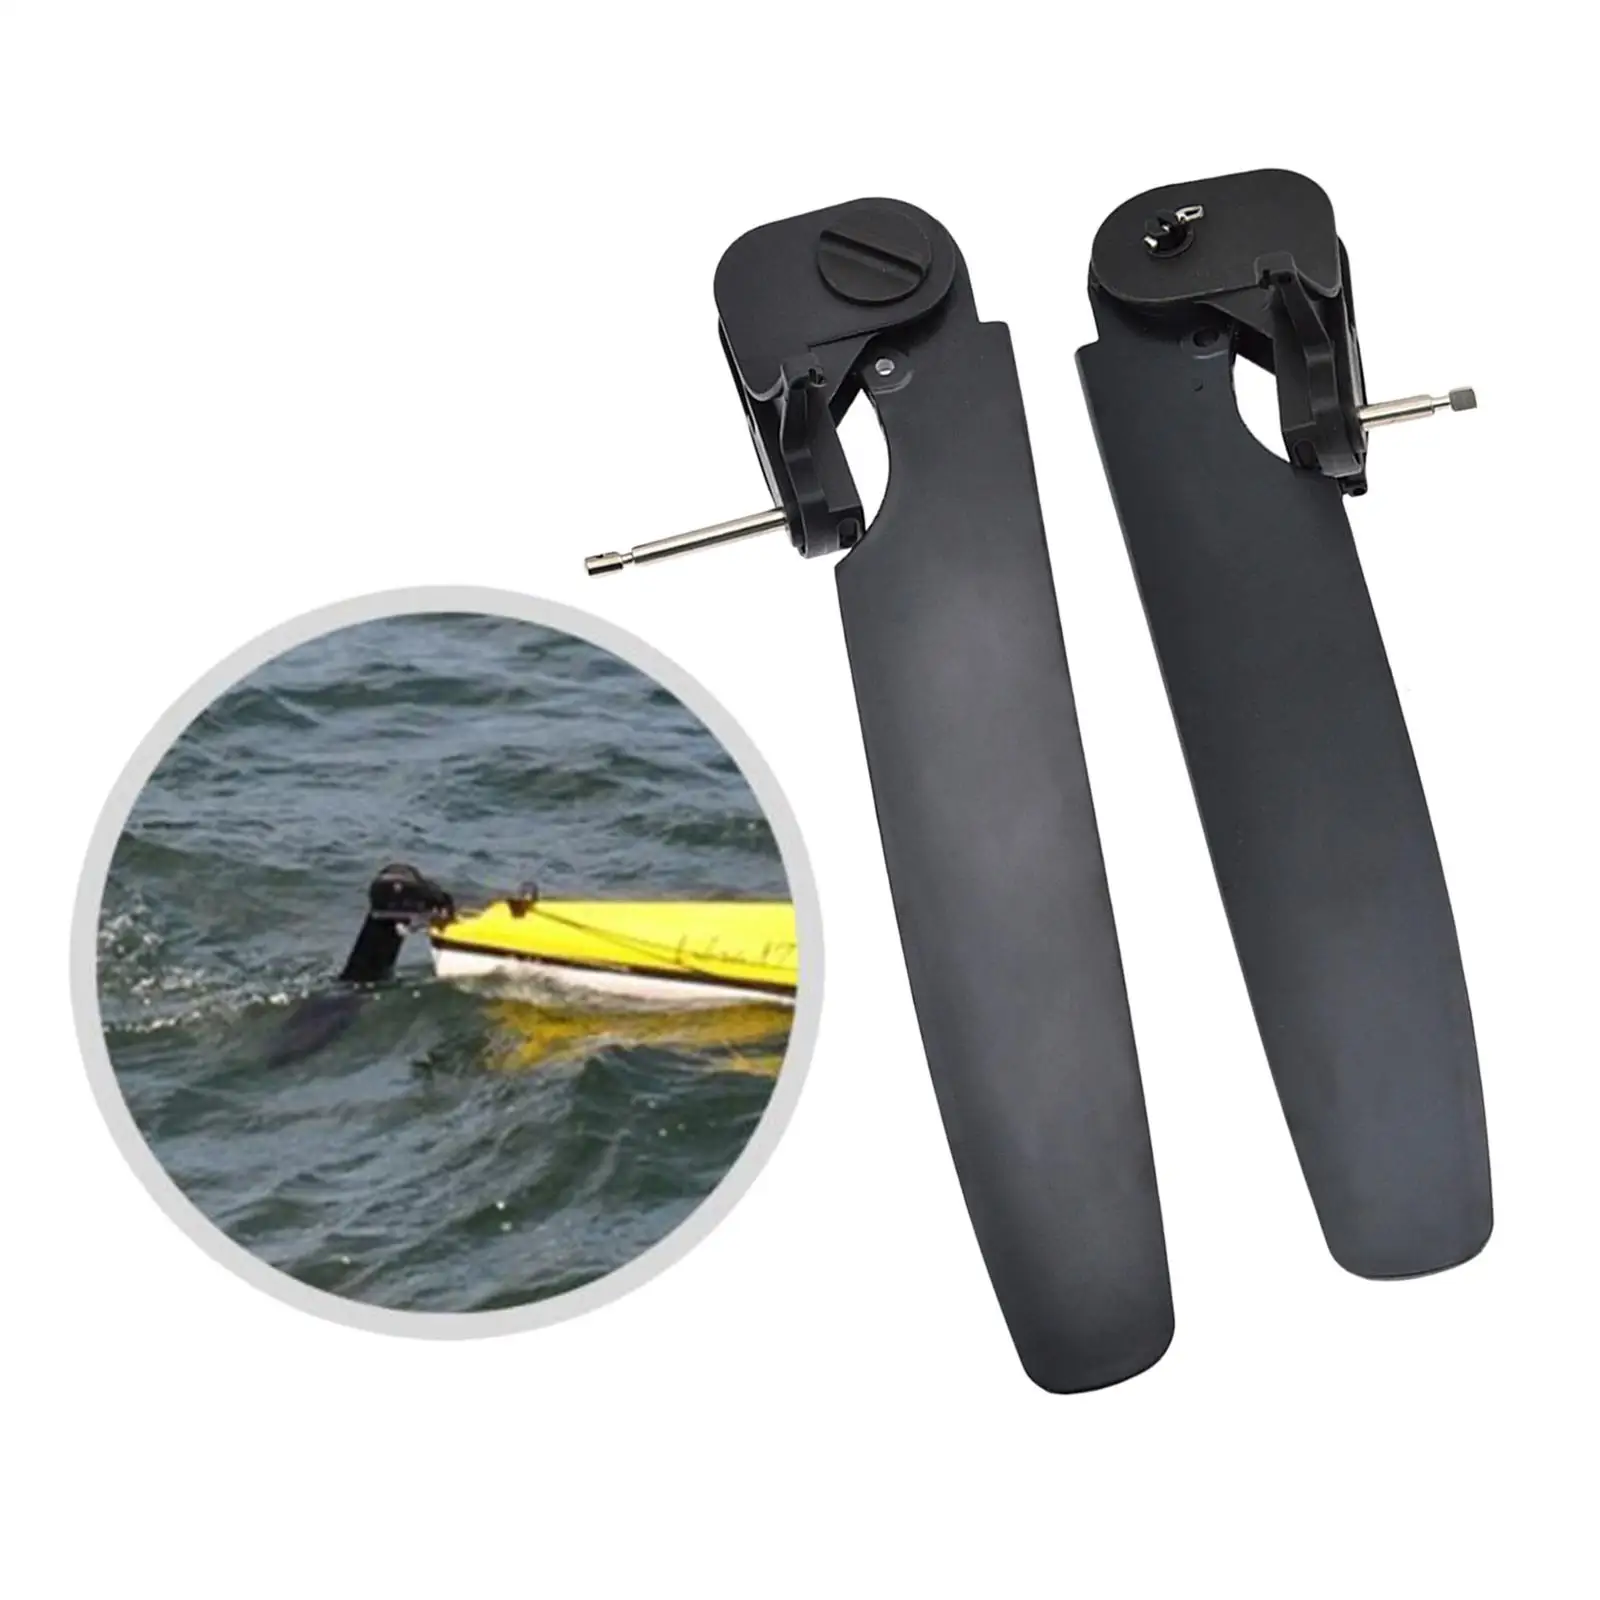 Fixation Rear Tail Rudder Equipment Sturdy Kit for Kayak Canoe Control Direction 